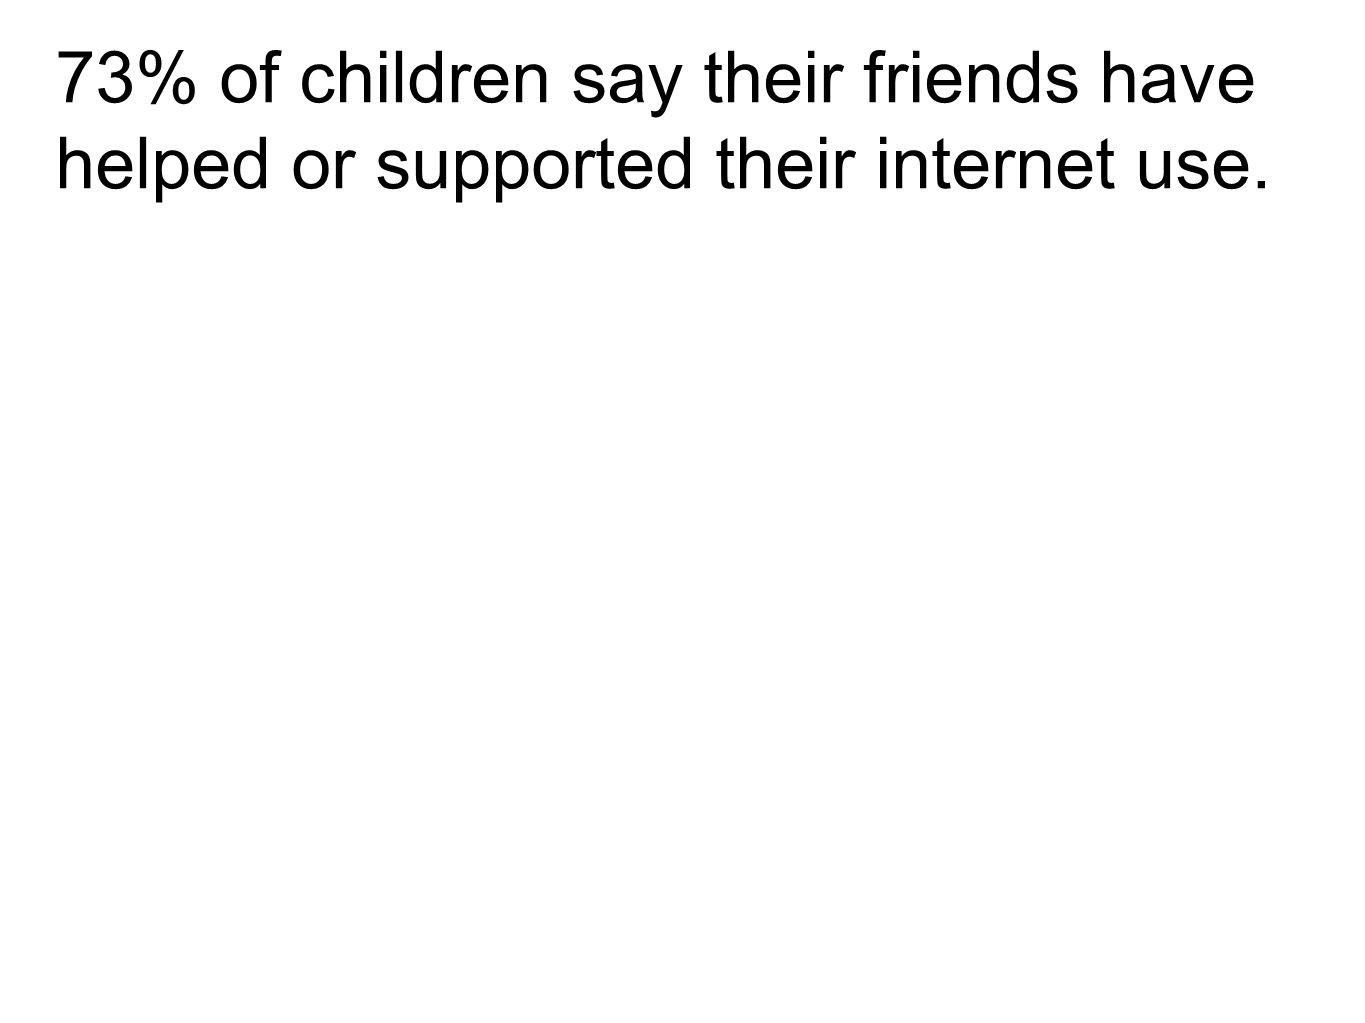 73% of children say their friends have helped or supported their internet use.